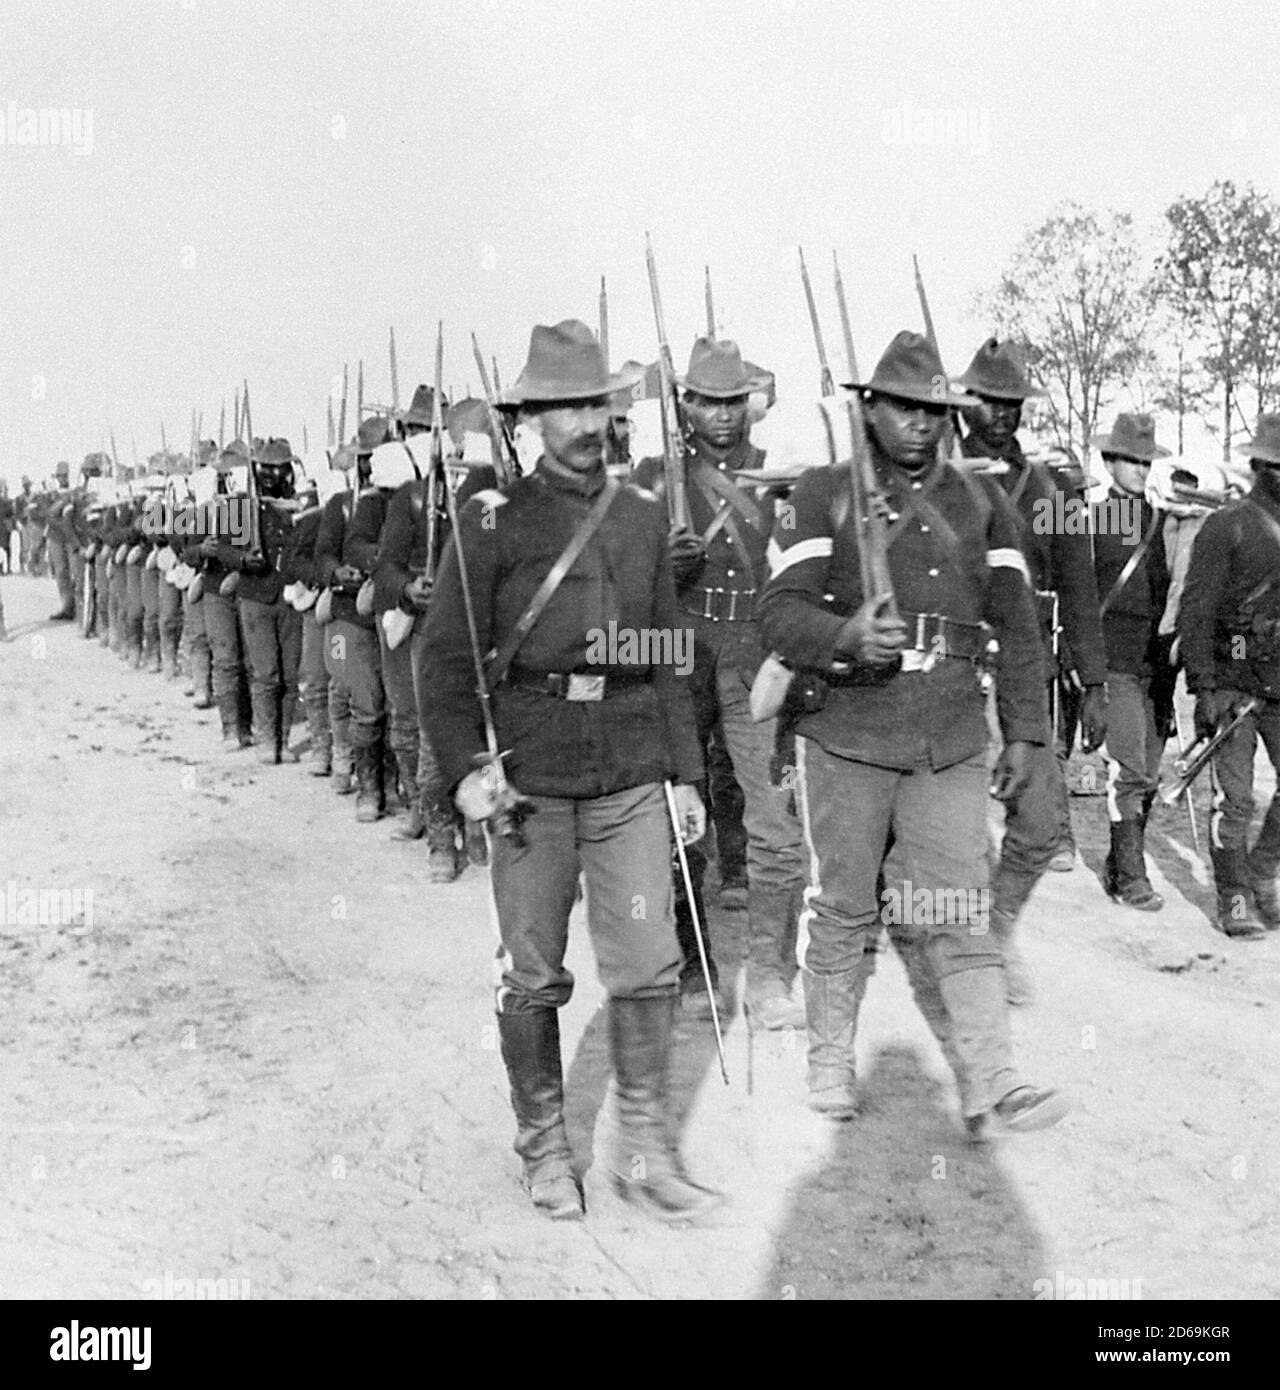 Buffalo soldiers of the 24th U.S. Infantry in Cuba during the Spanish American War, c.1898 Stock Photo